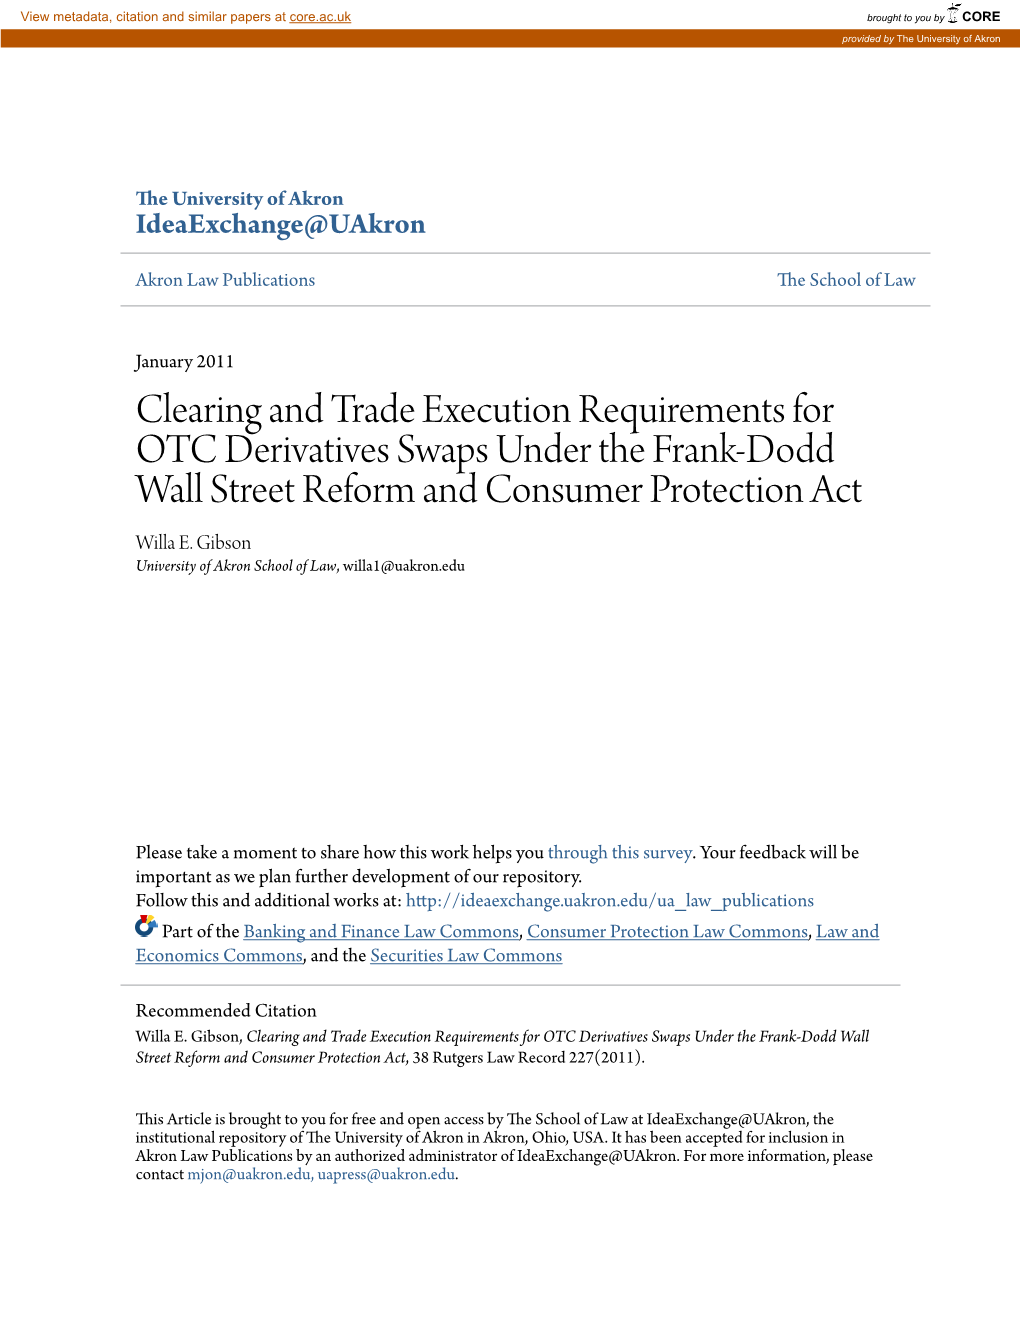 Clearing and Trade Execution Requirements for OTC Derivatives Swaps Under the Frank-Dodd Wall Street Reform and Consumer Protection Act Willa E